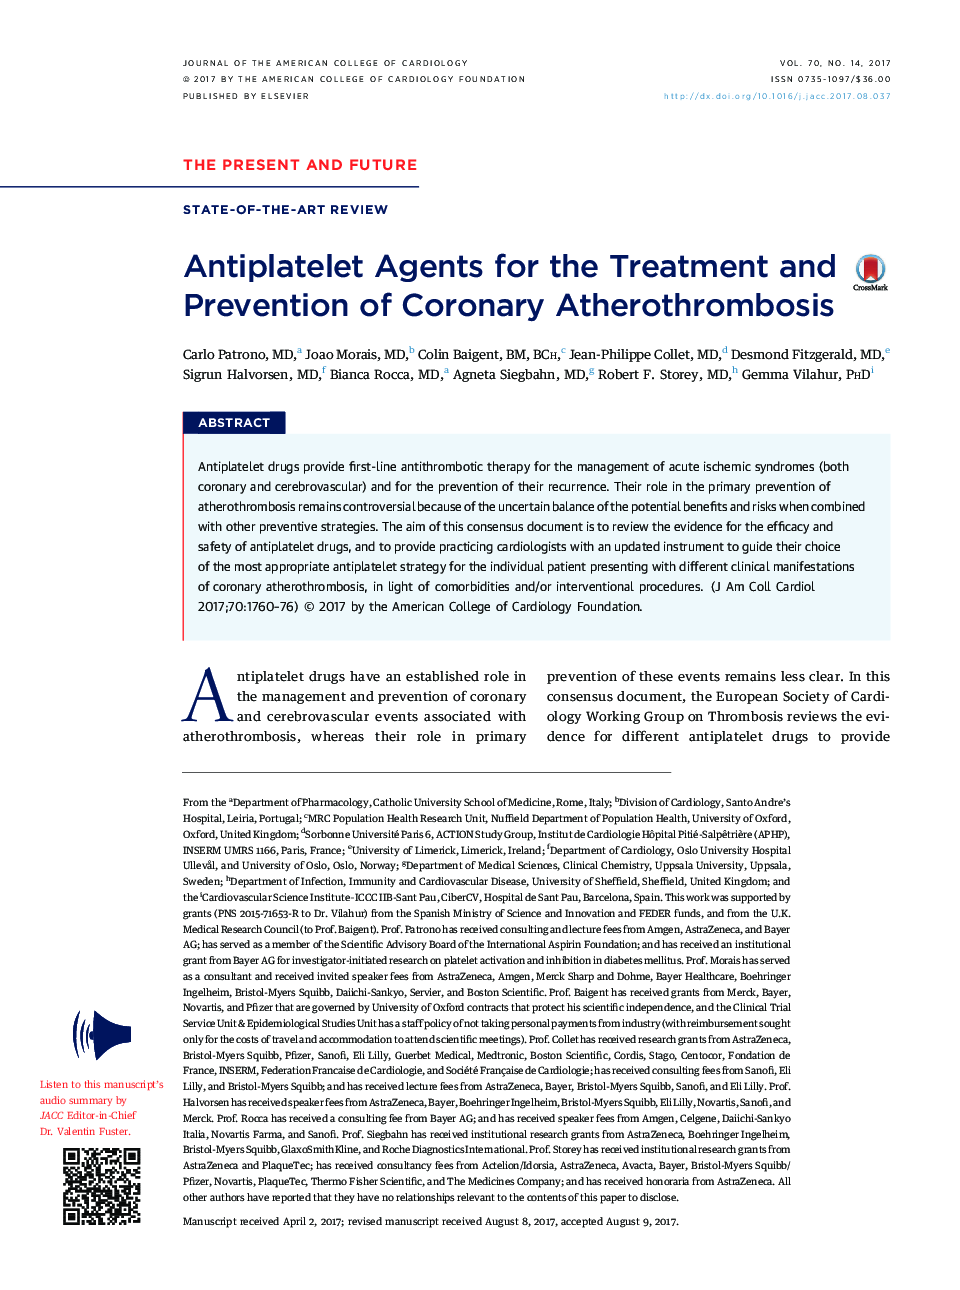 Antiplatelet Agents for the Treatment and Prevention of Coronary Atherothrombosis